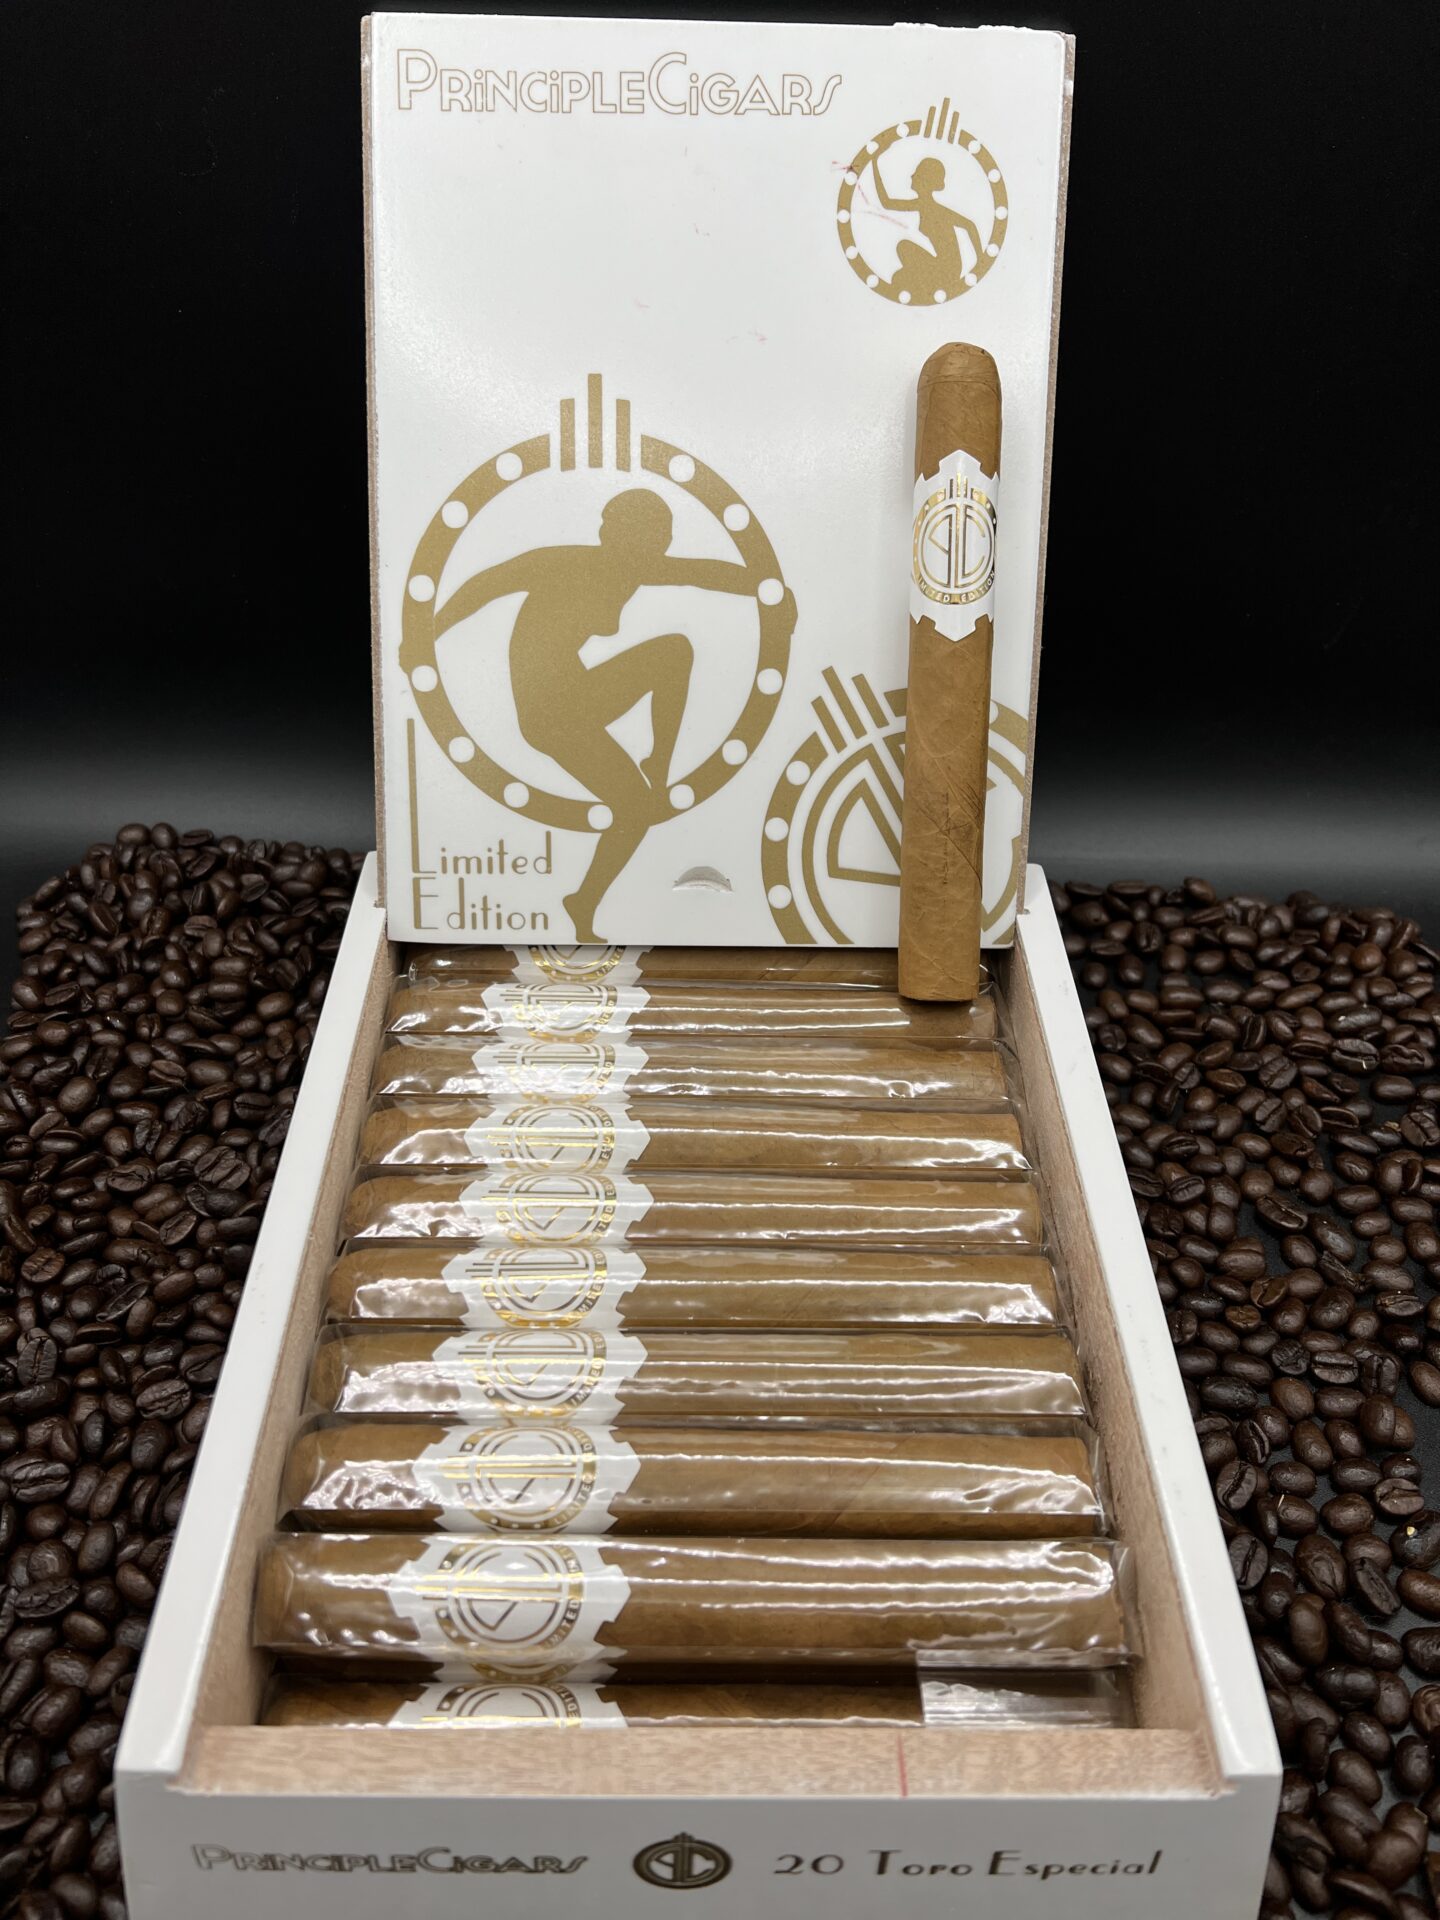 Principle Cigars - White Gold Limited Edition Toro cigars supplied by Sir Louis Cigars